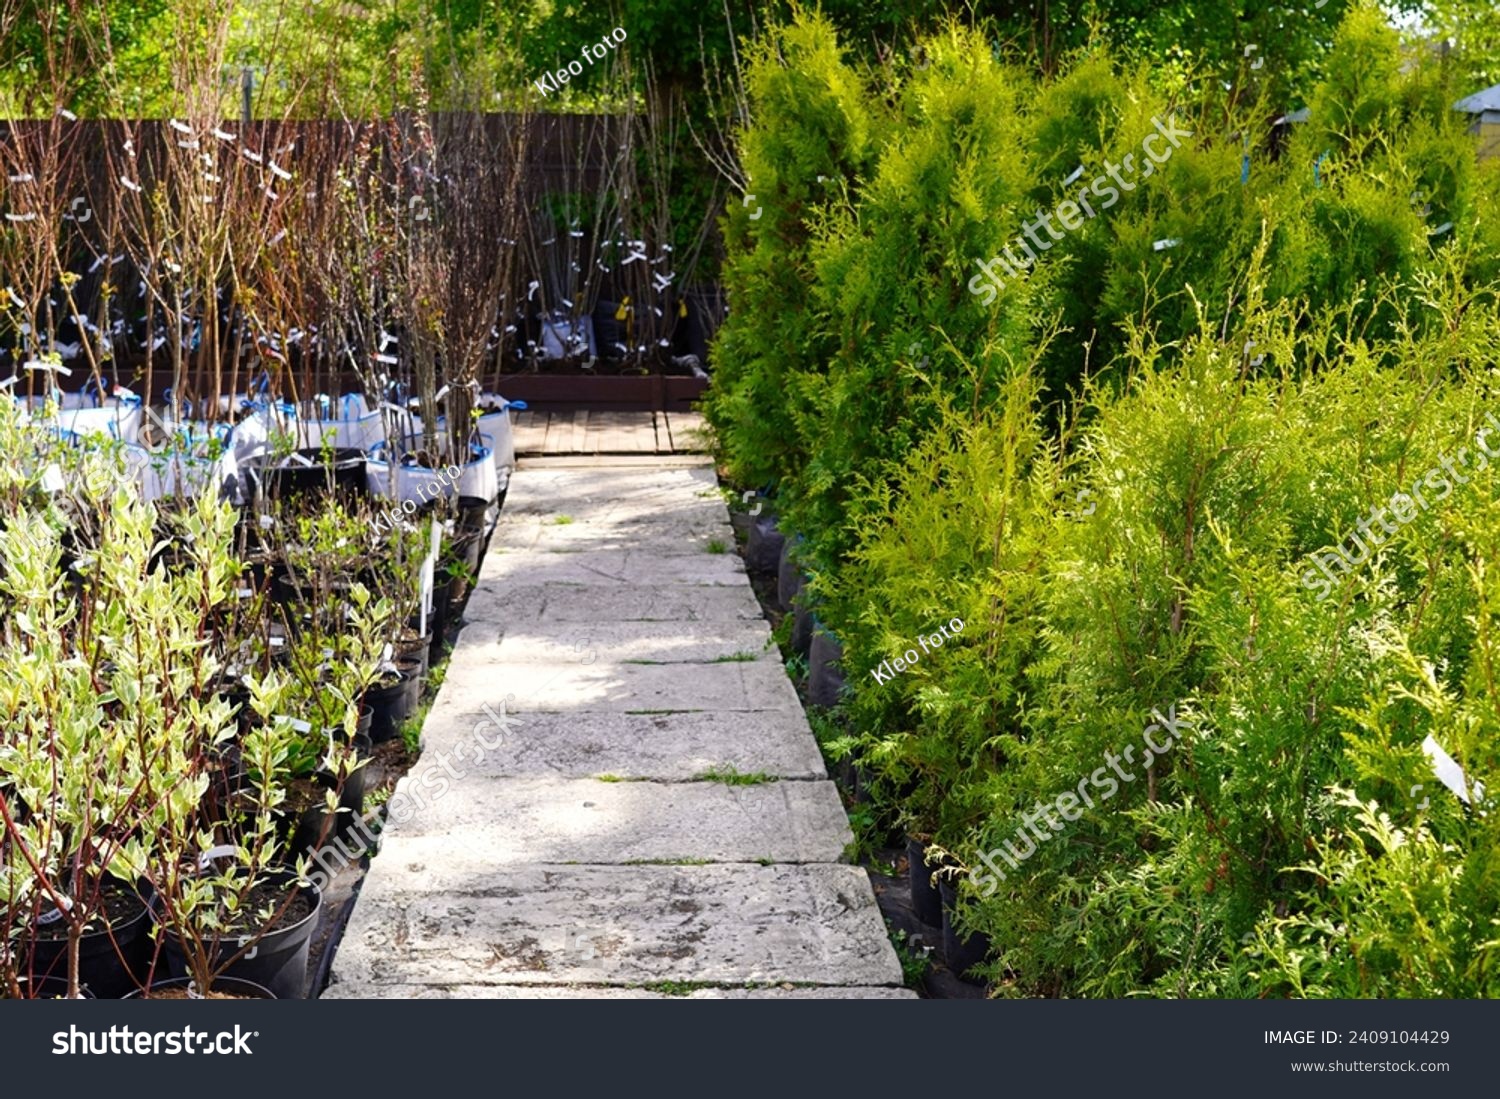 a nursery of ornamental plants with seedlings of thuja bushes in pots with earth along a wooden path and small trees of varietal apple trees in spring.  #2409104429